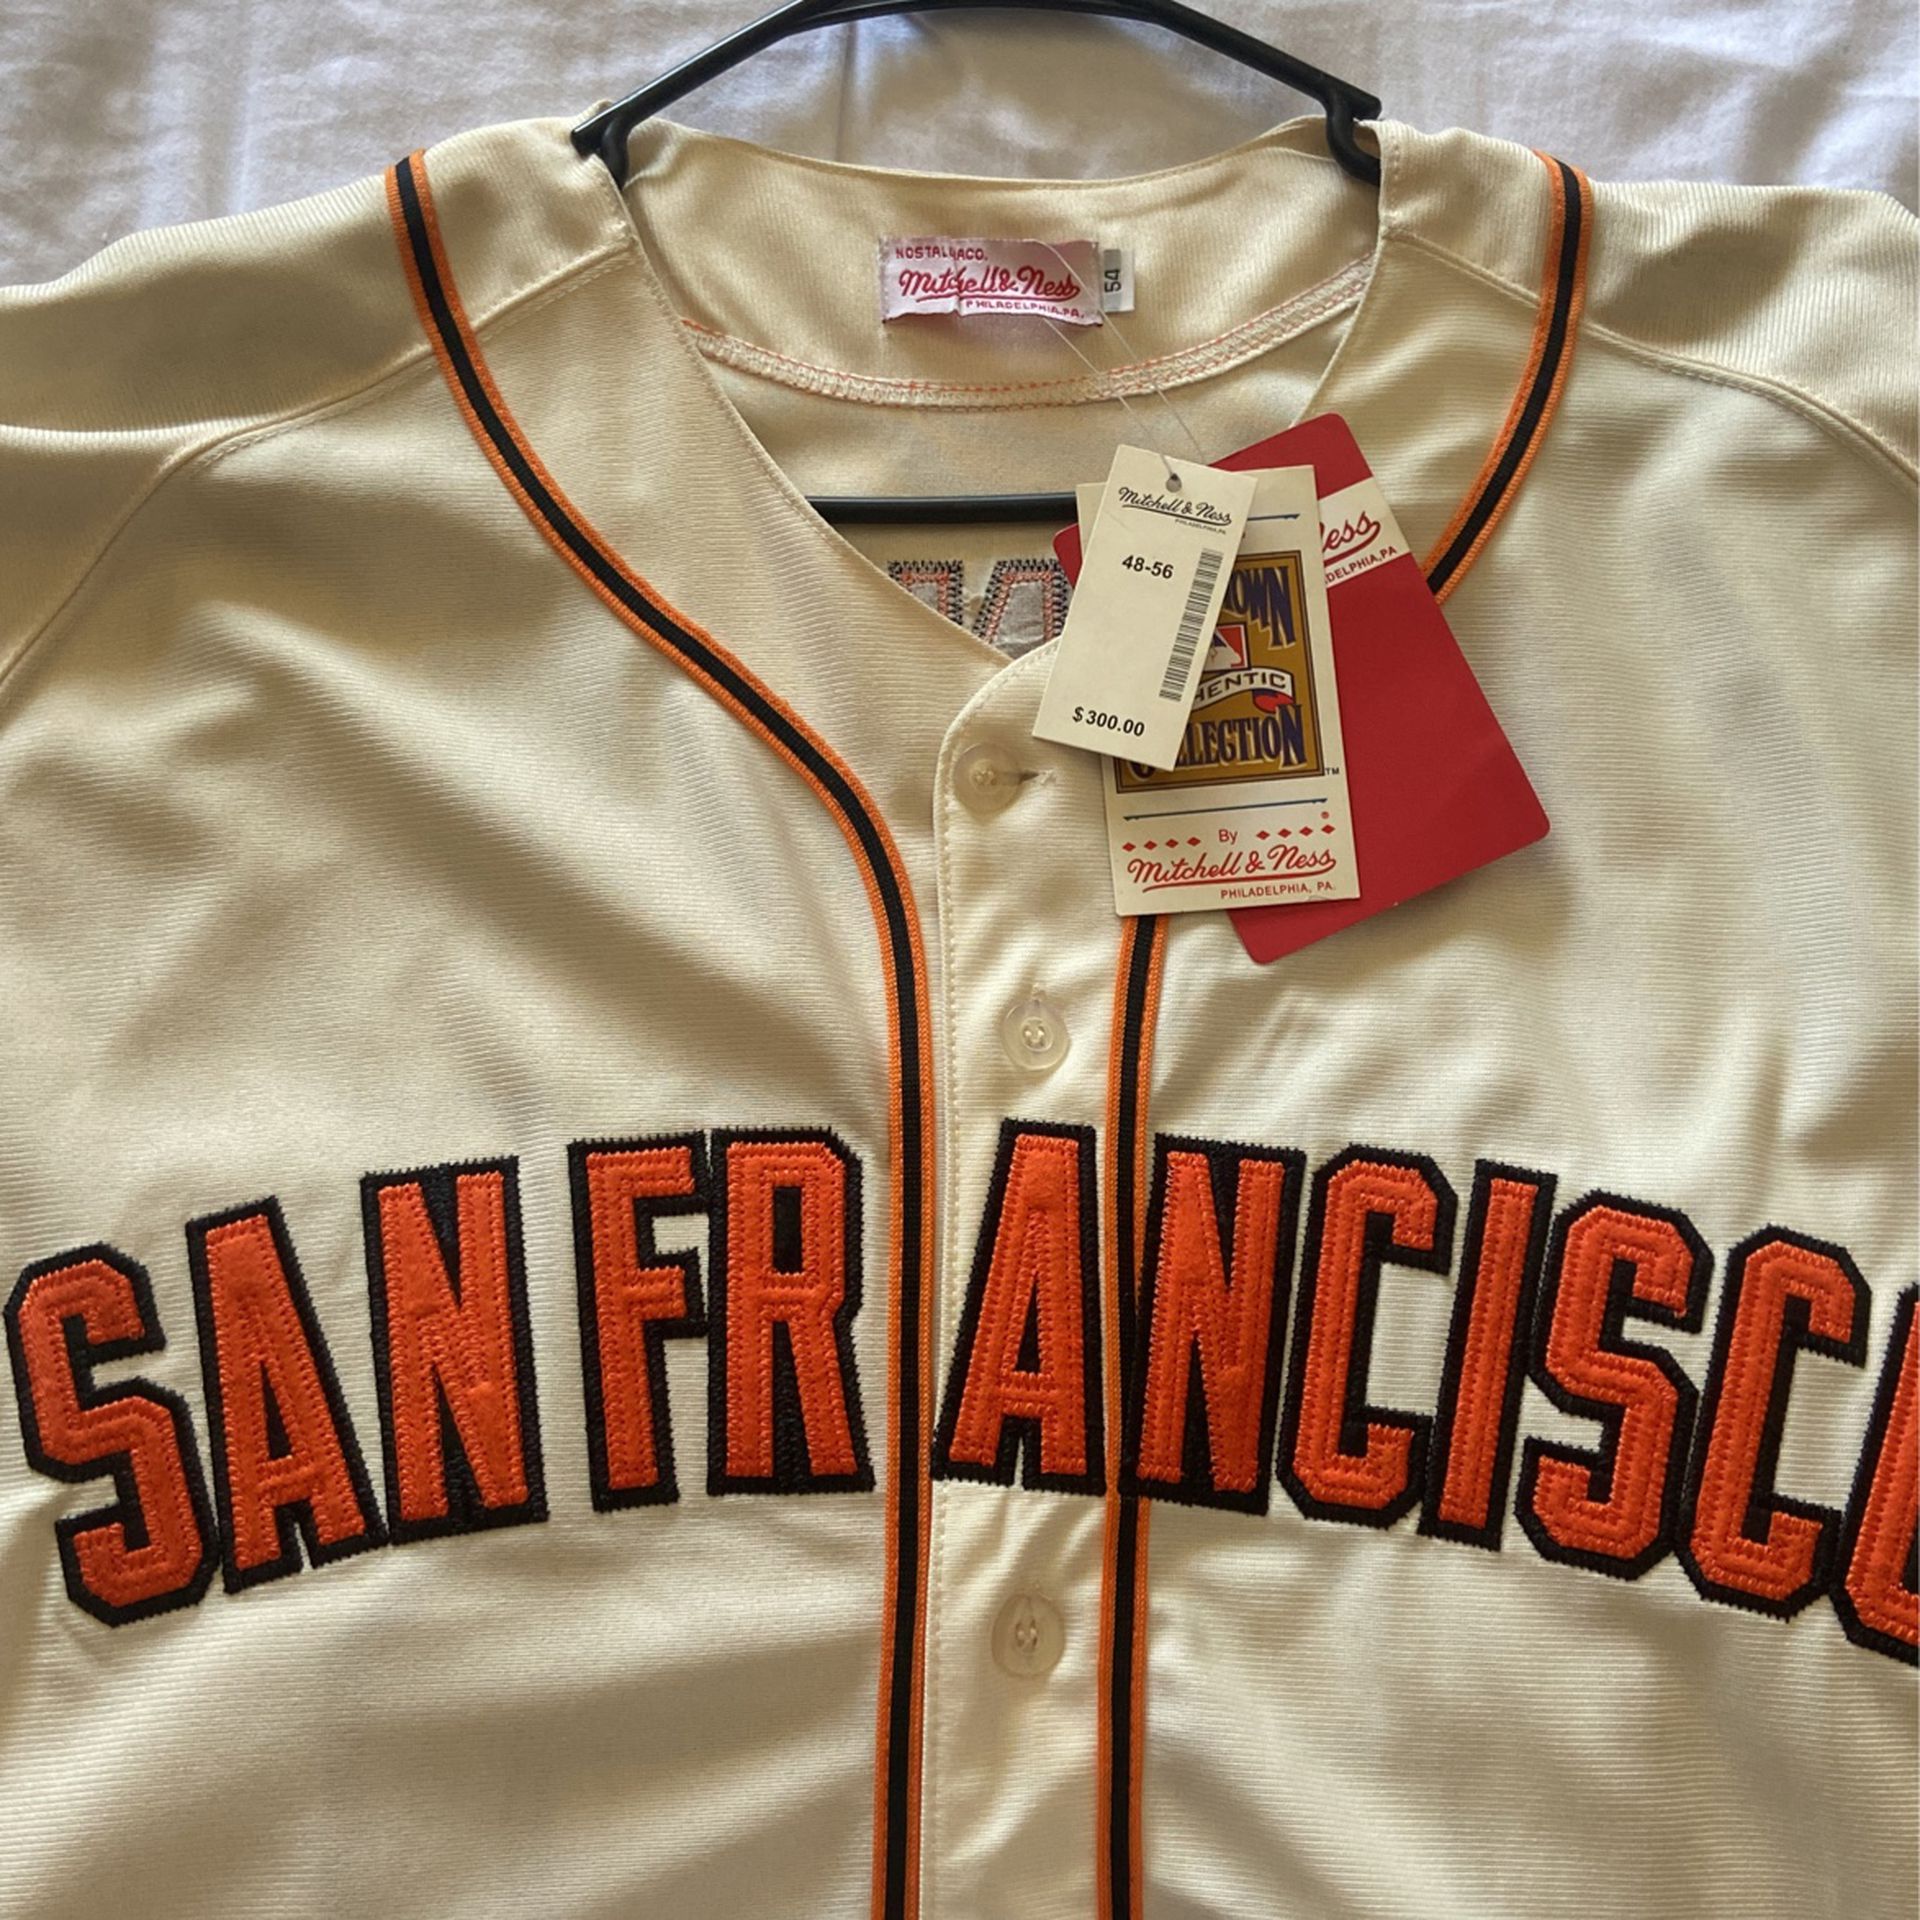 barry bonds mitchell and ness